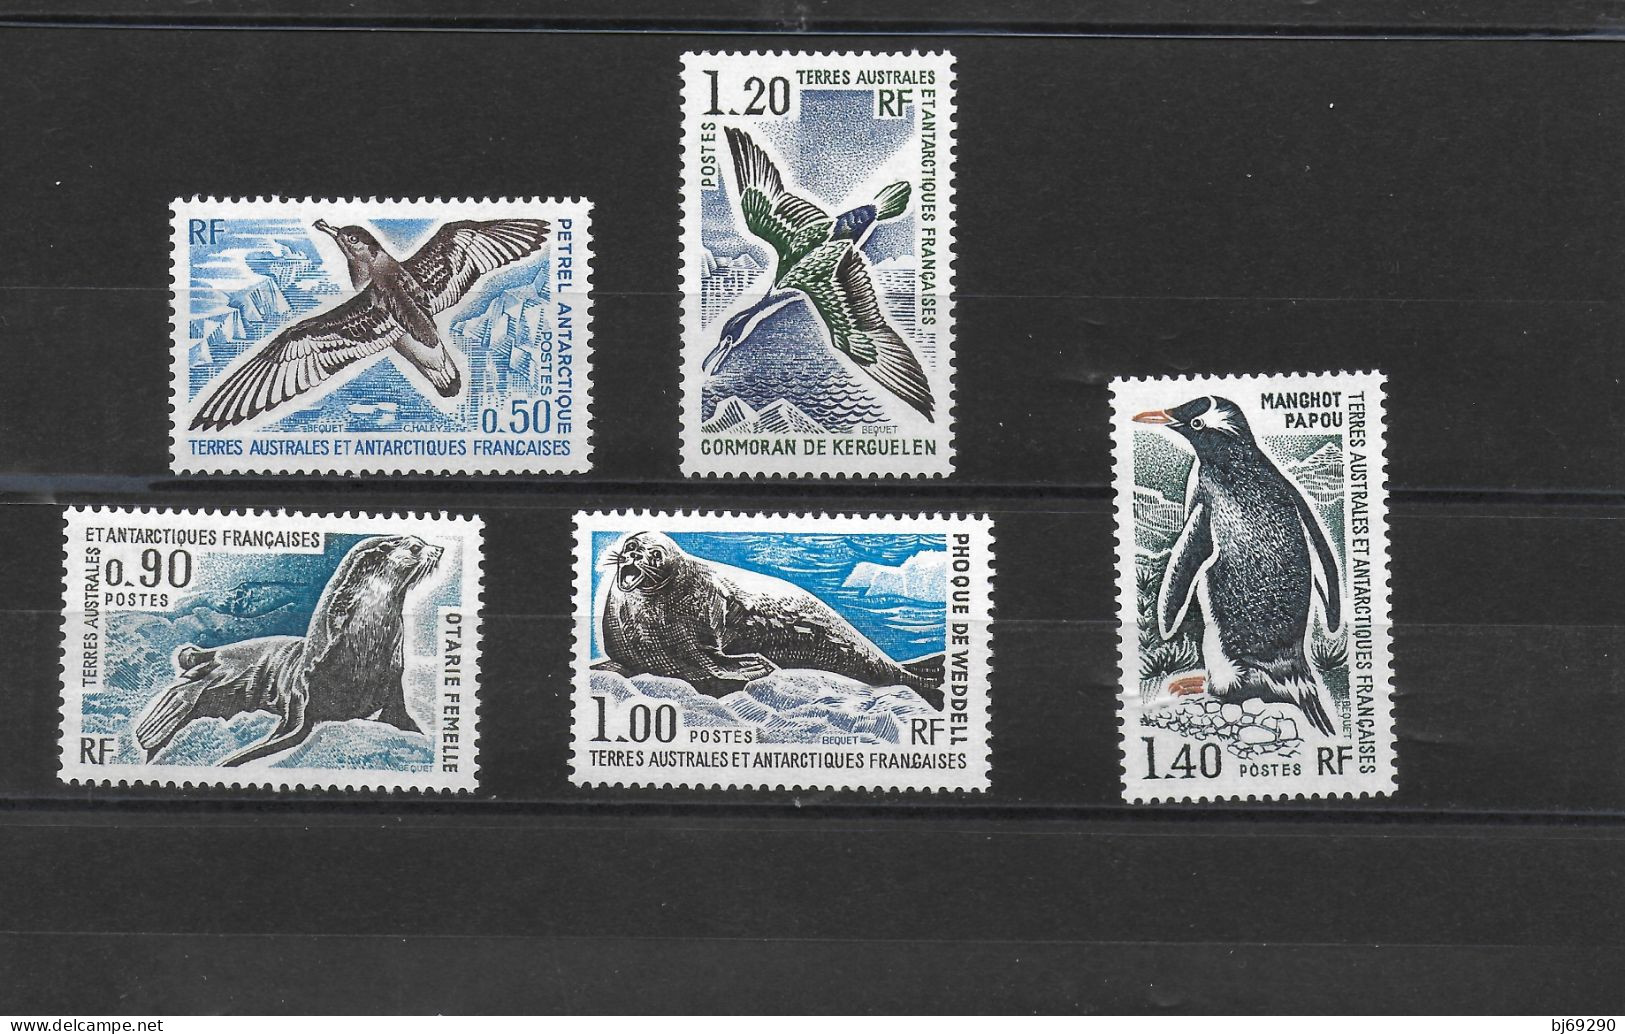 TAAF - 1976 : N° 56-57-58-59-60 Timbres  Neufs ** - Nuevos